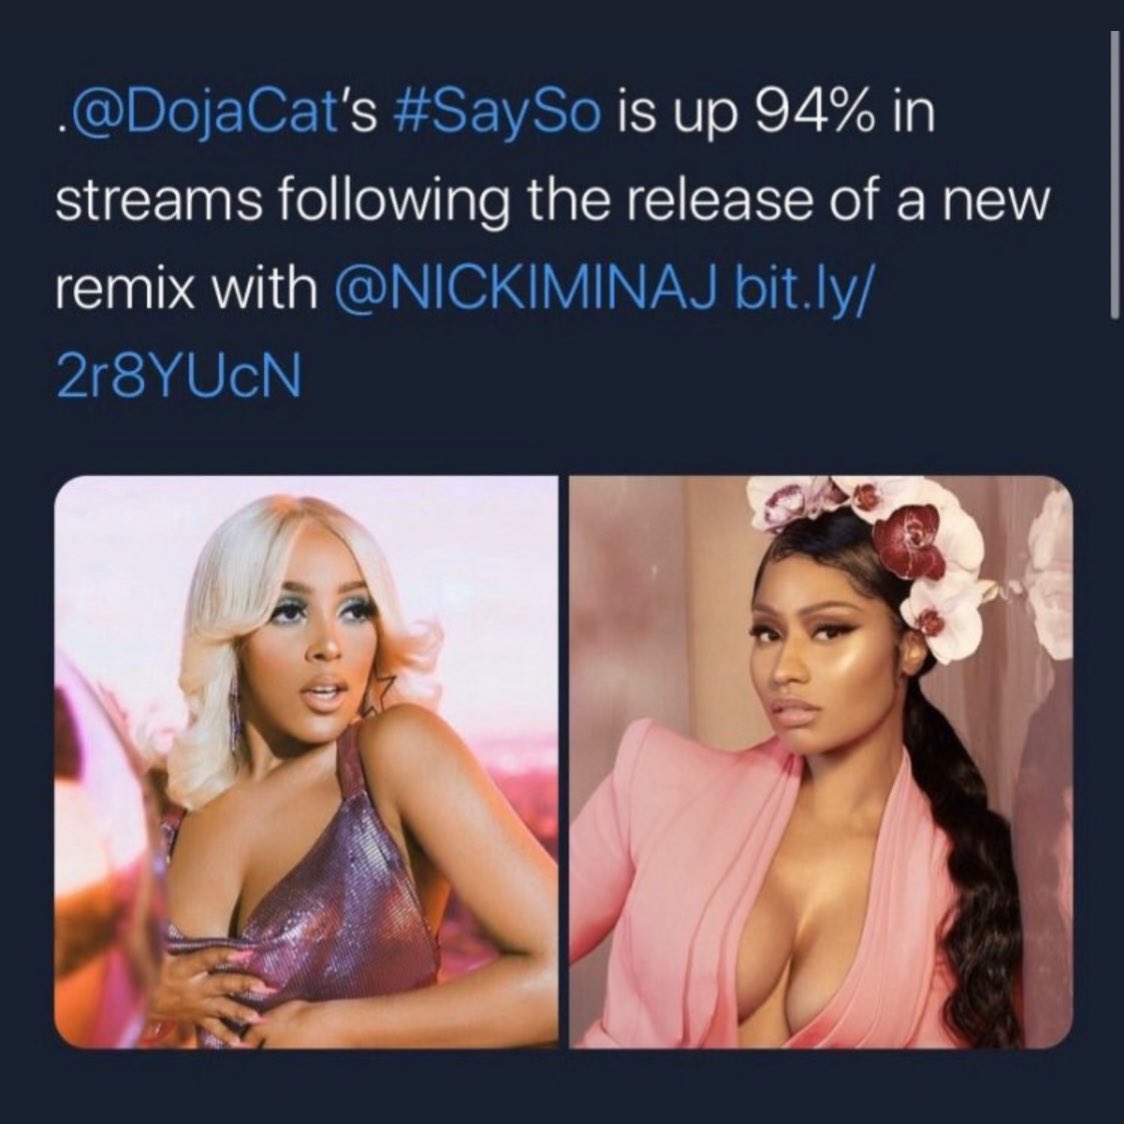 “Nicki jumped on a top 5 to get a number one” Say So was predicted to fall out of the top ten. Doja’s label ASKED Nicki to get on it. Nicki brought in 80k sales and a 94% increase in streams, all of which carried say so to number one.